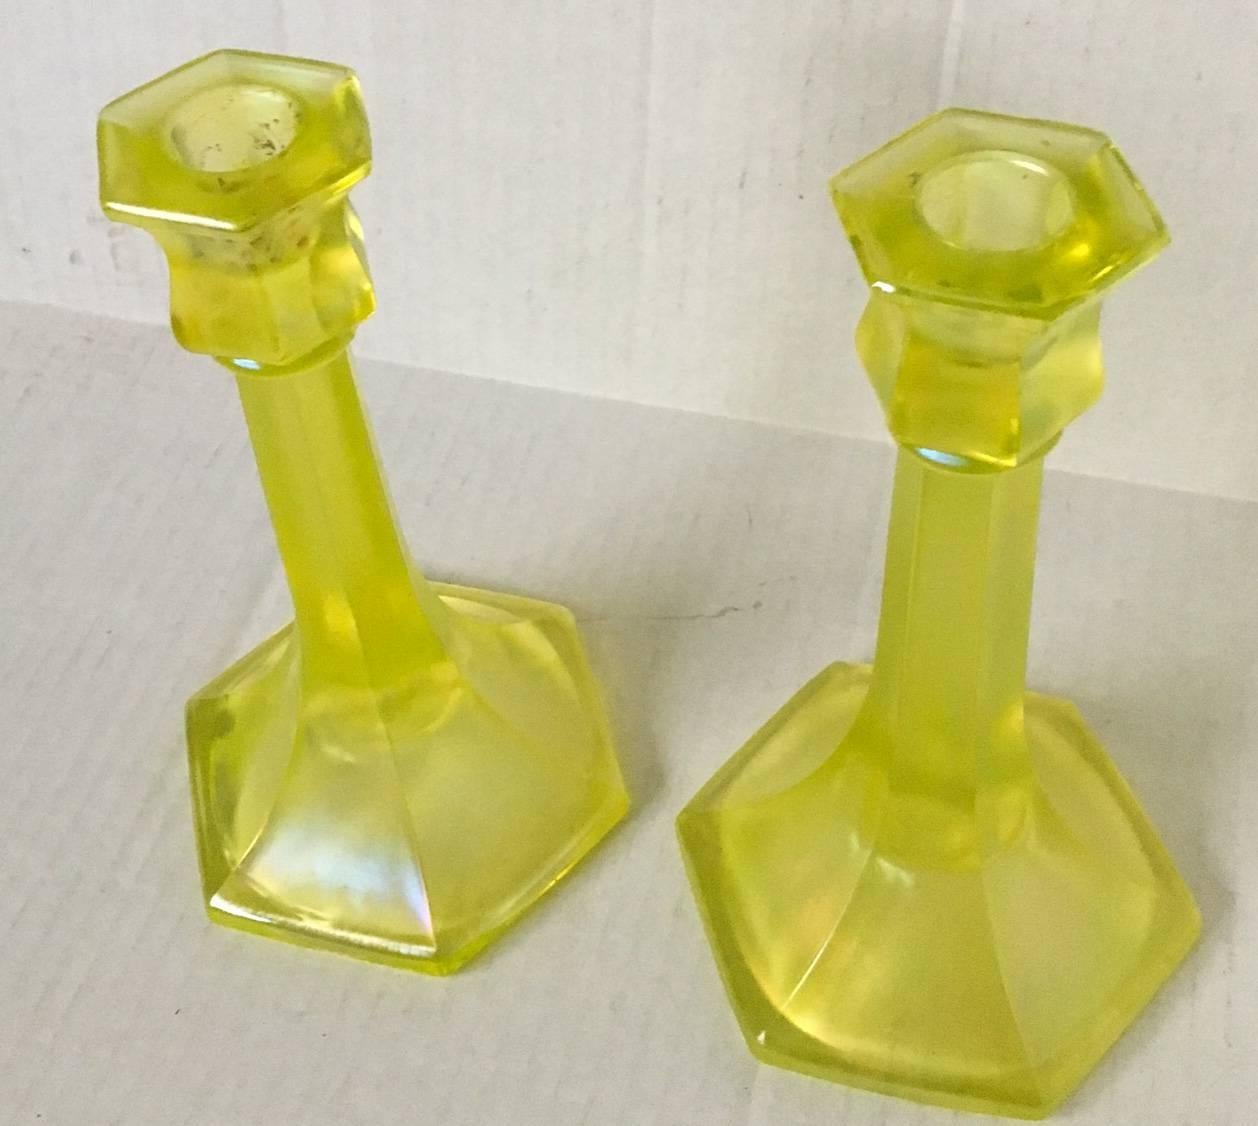 Excellent pair of American pressed glass iridescent greenish yellow candlesticks referred to as "Vaseline" glass. Unmarked, most likely created by a New England glass factory. Each, 5" diameter x 8.5" height.